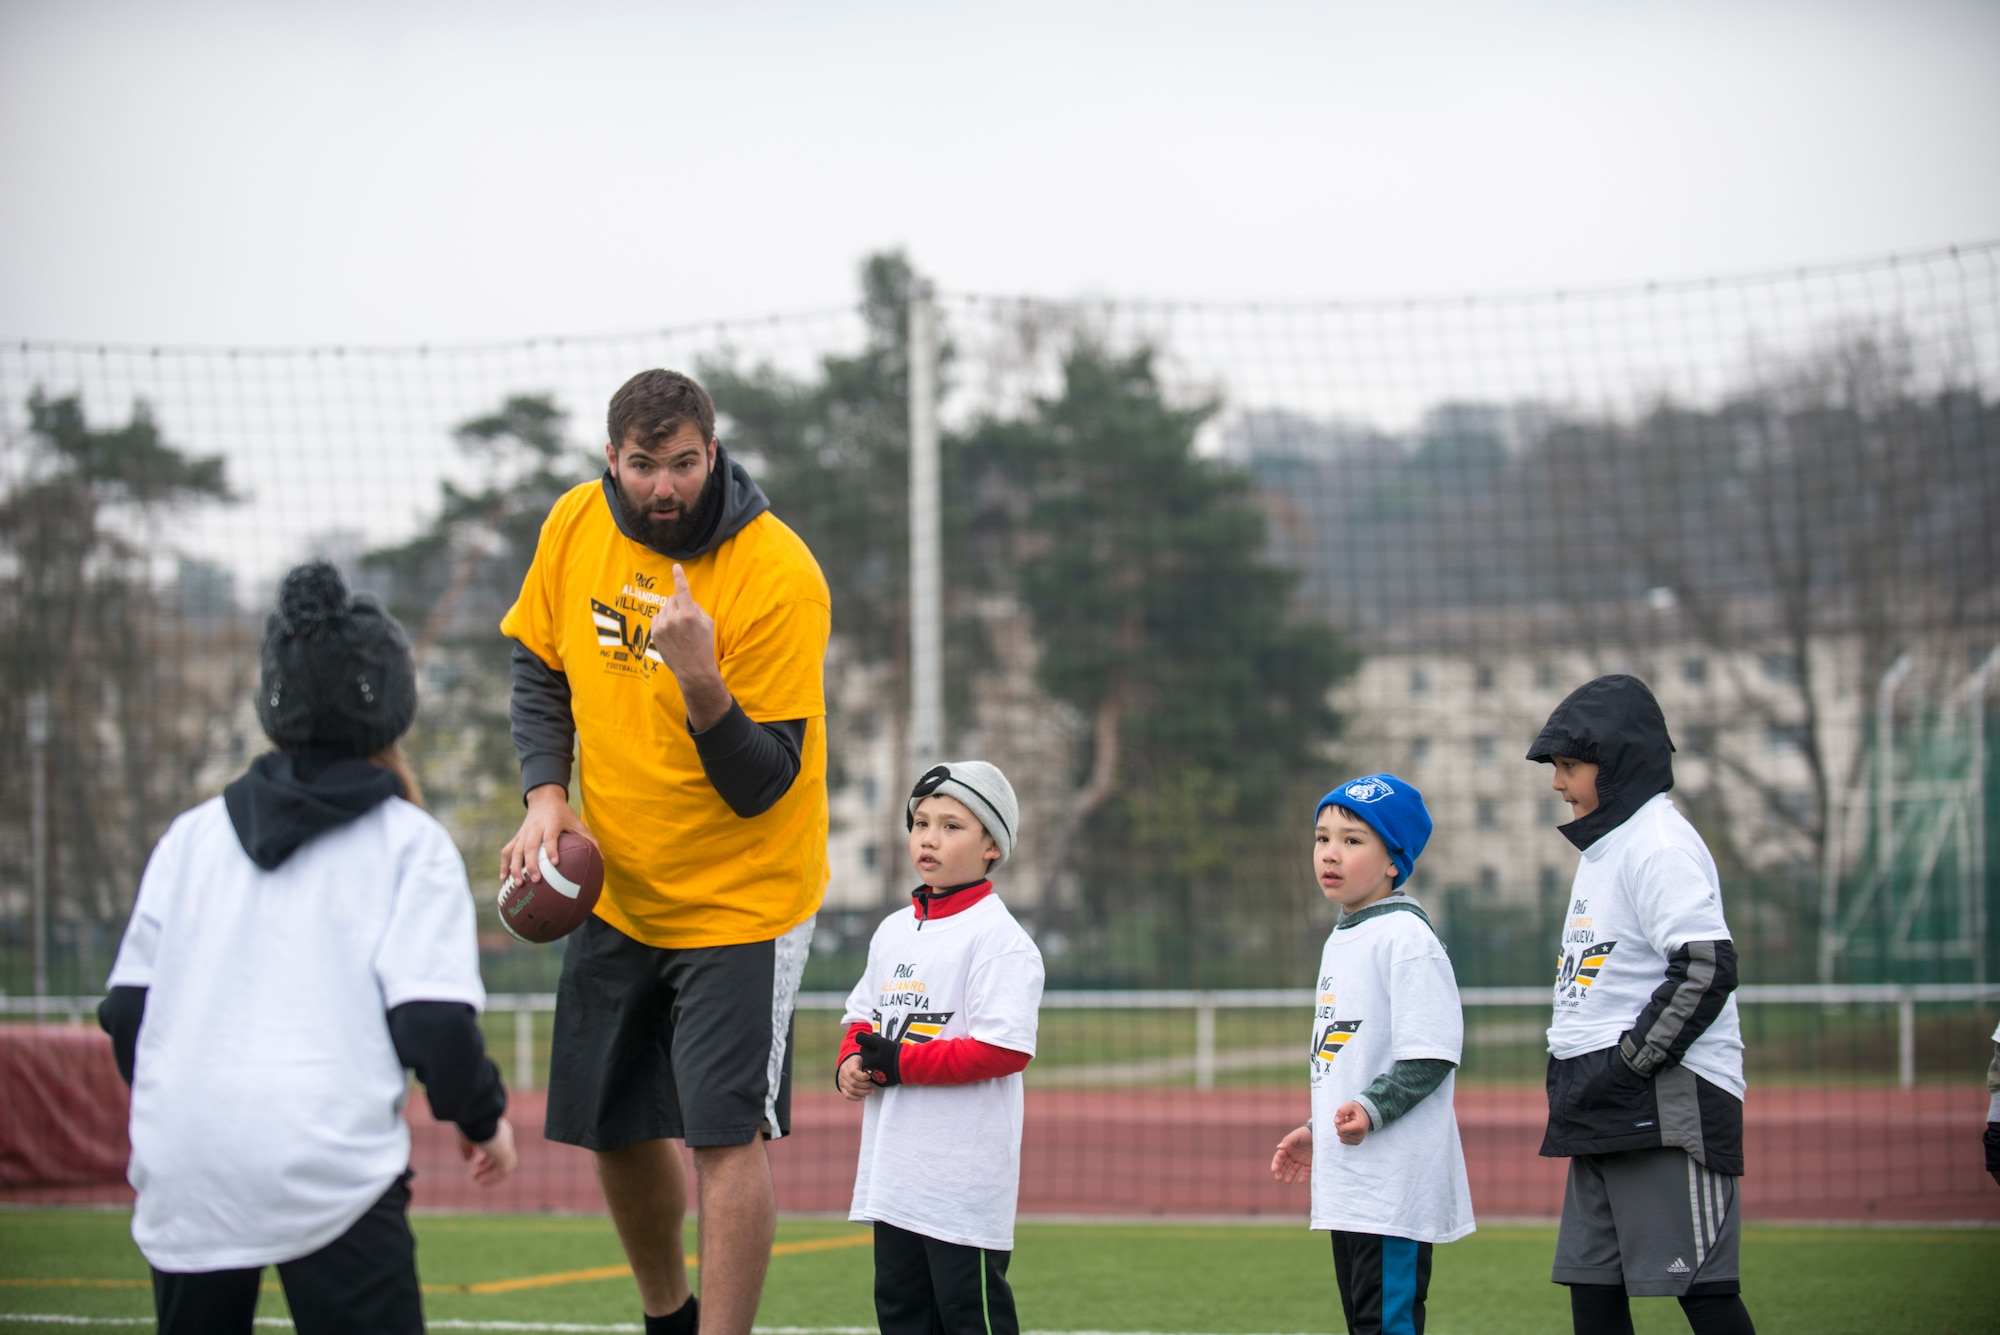 Alejandro Villanueva, Pittsburgh Steelers offensive lineman, coaches one of his camp attendees on defensive drills during his football camp at Kaiserslautern High School on Vogelweh Military Complex, Germany, April 14, 2019. After leaving the U.S. Army, Villanueva worked and signed with the Steelers to play in the NFL. (U.S. Air Force photo by Staff Sgt. Jonathan Bass)